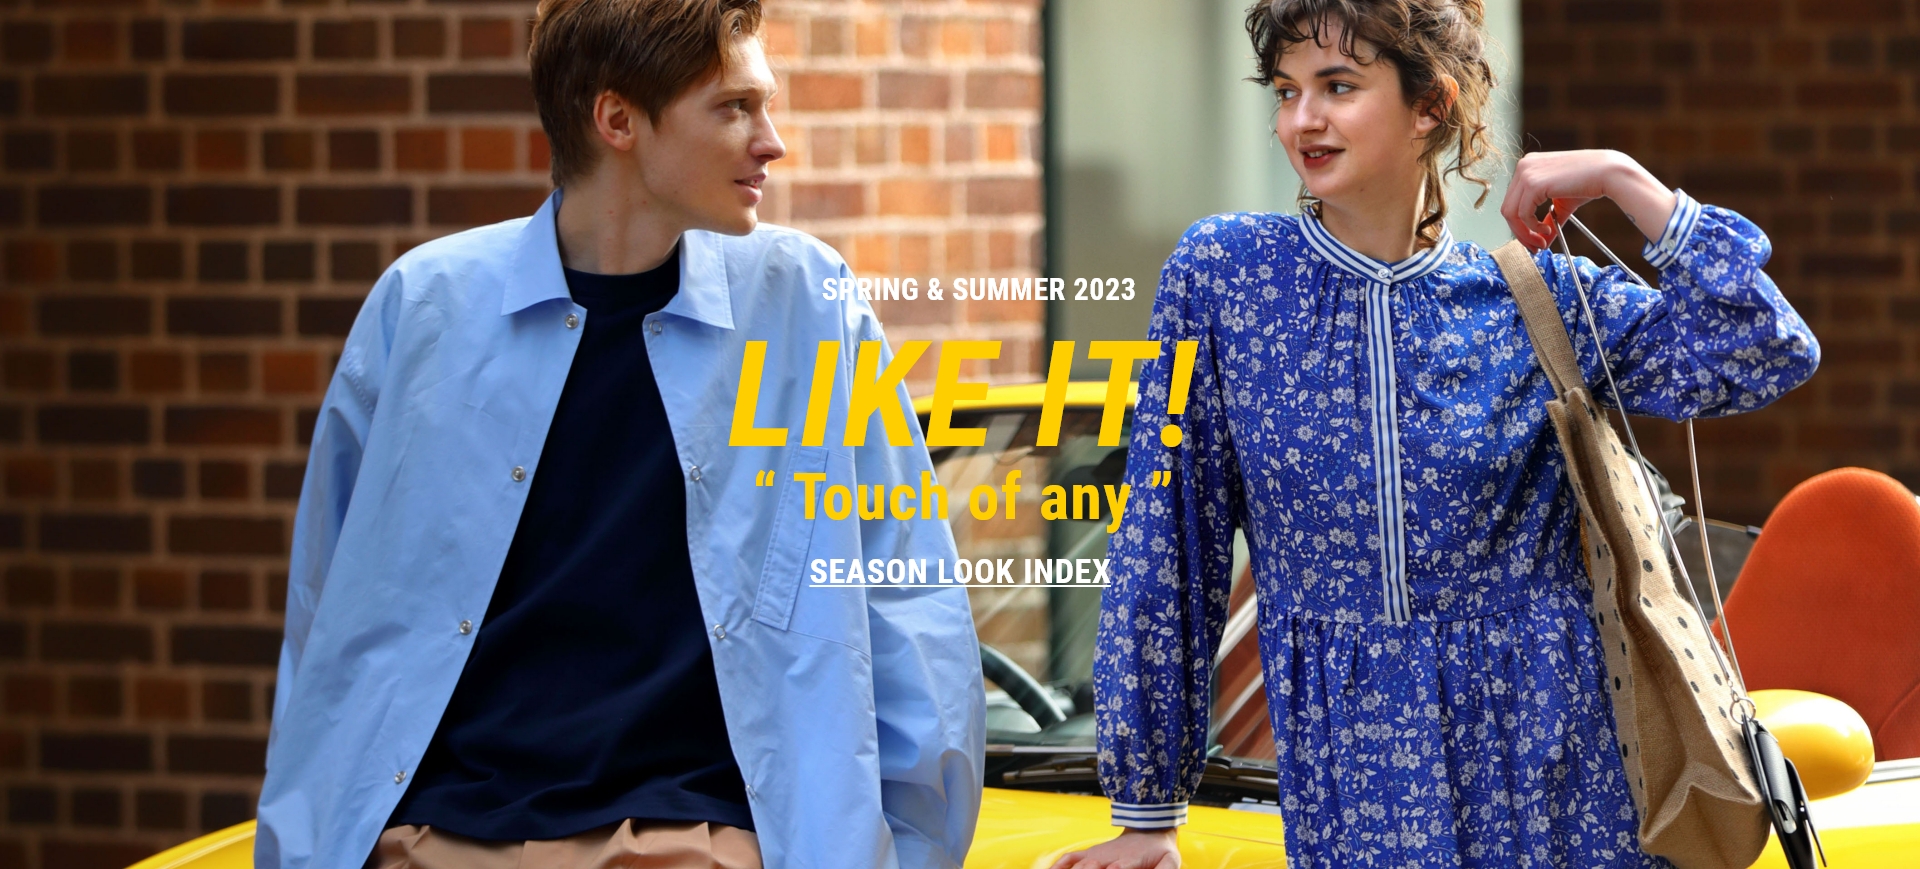 SPRING & SUMMER 2023 LIKE IT! “ Touch of any ” SEASON LOOK INDEX